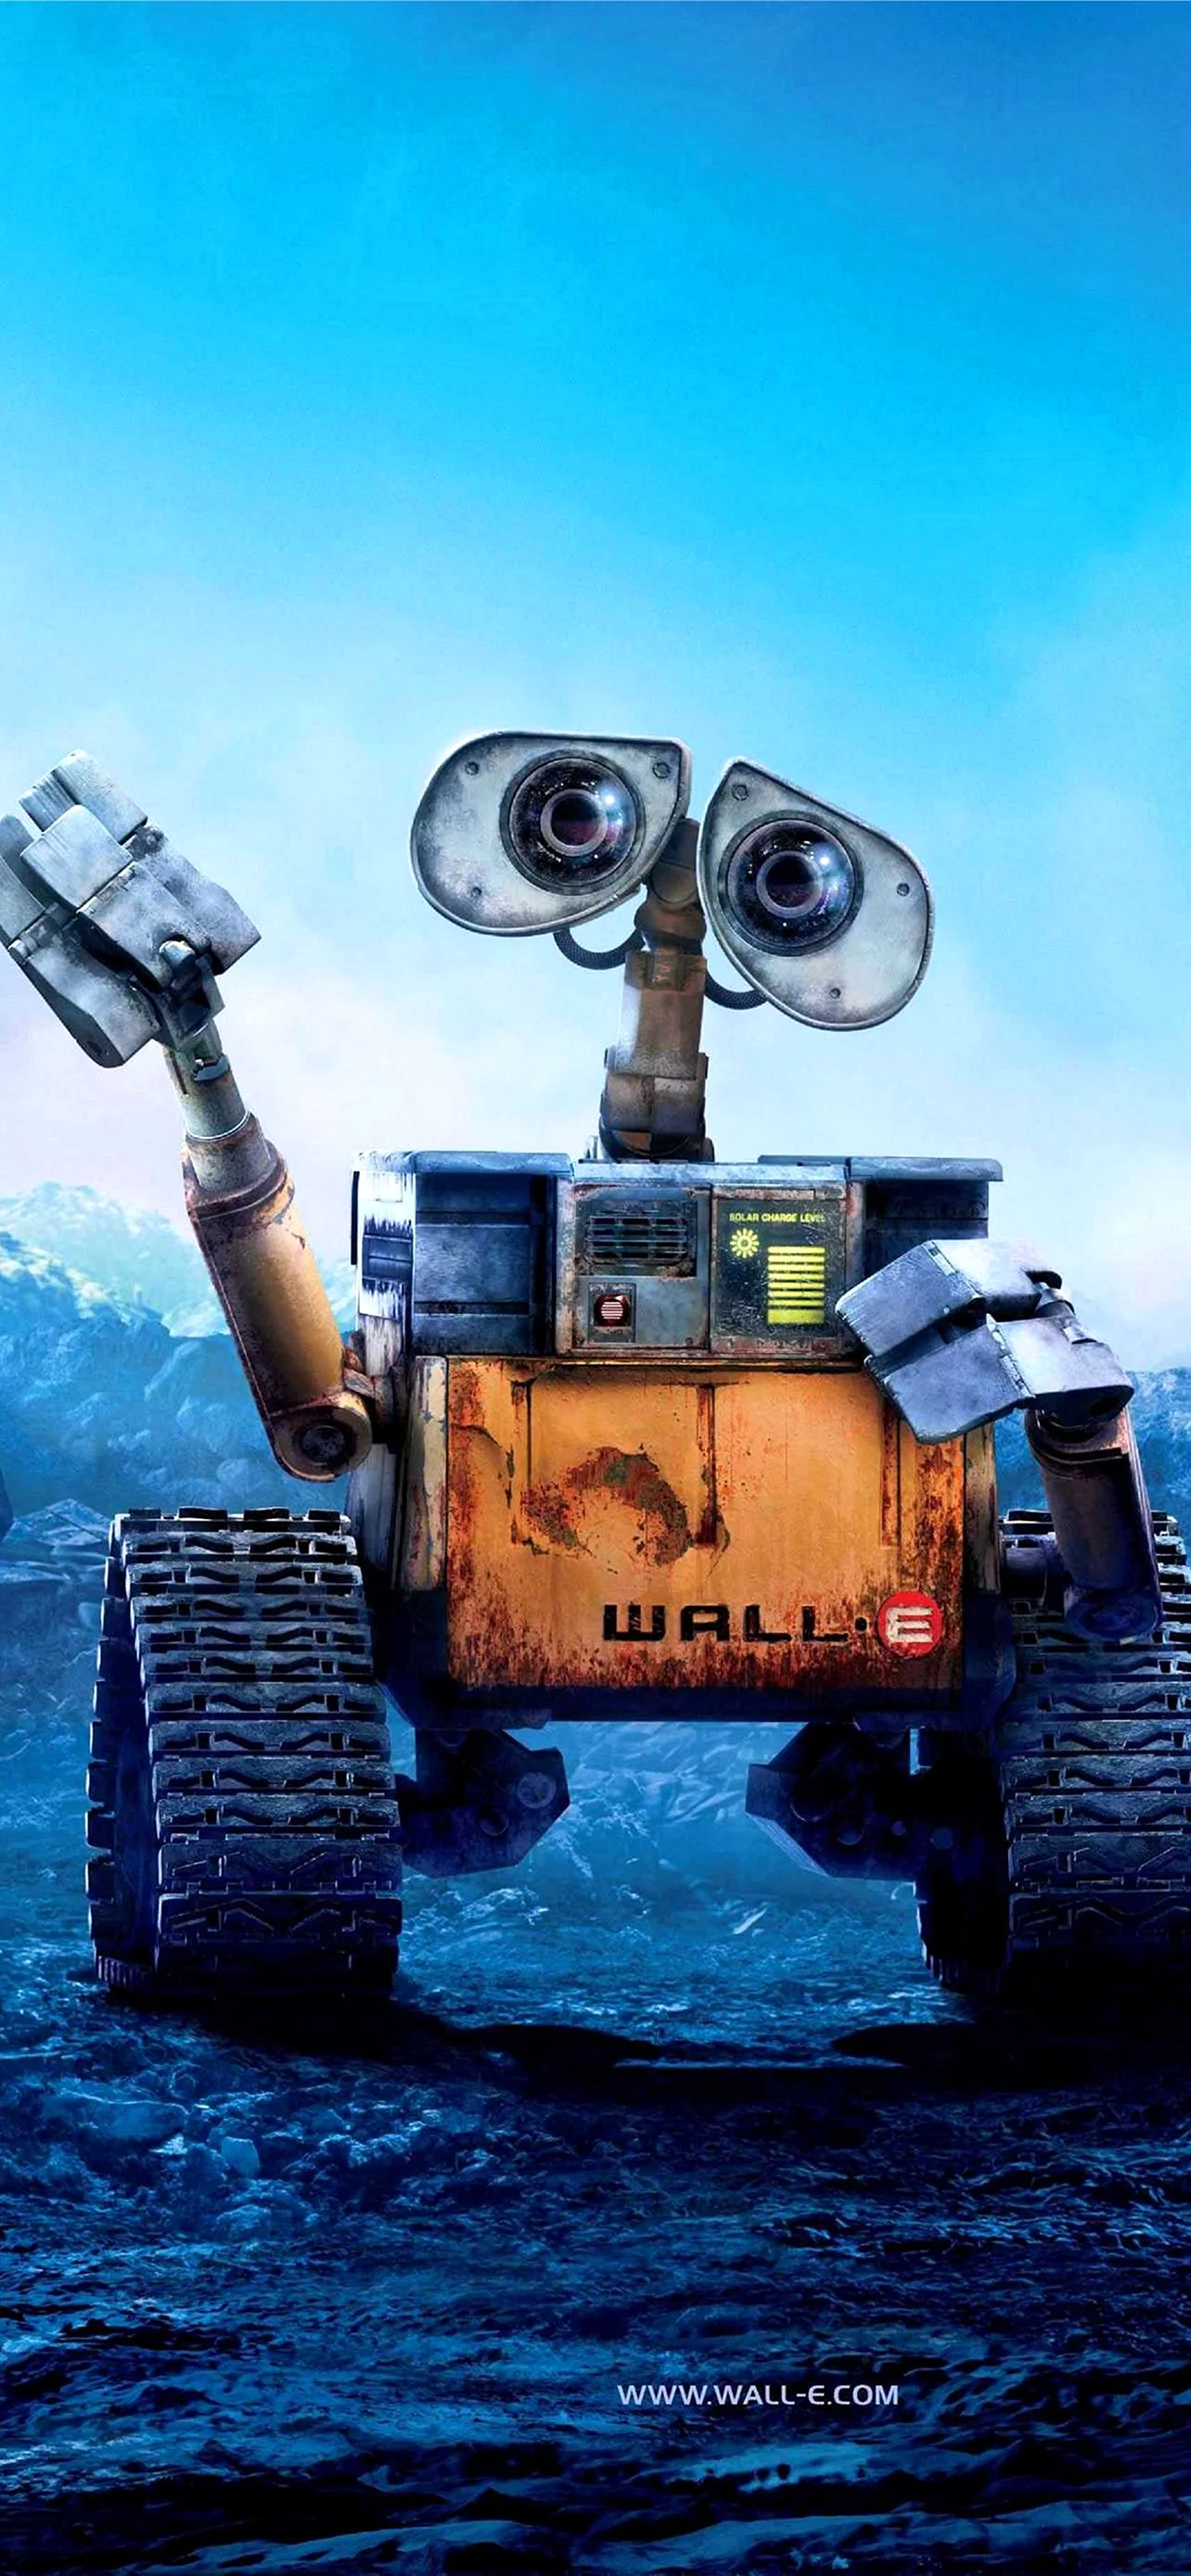 Wall-E Wallpaper for iPhone 13 Pro Max